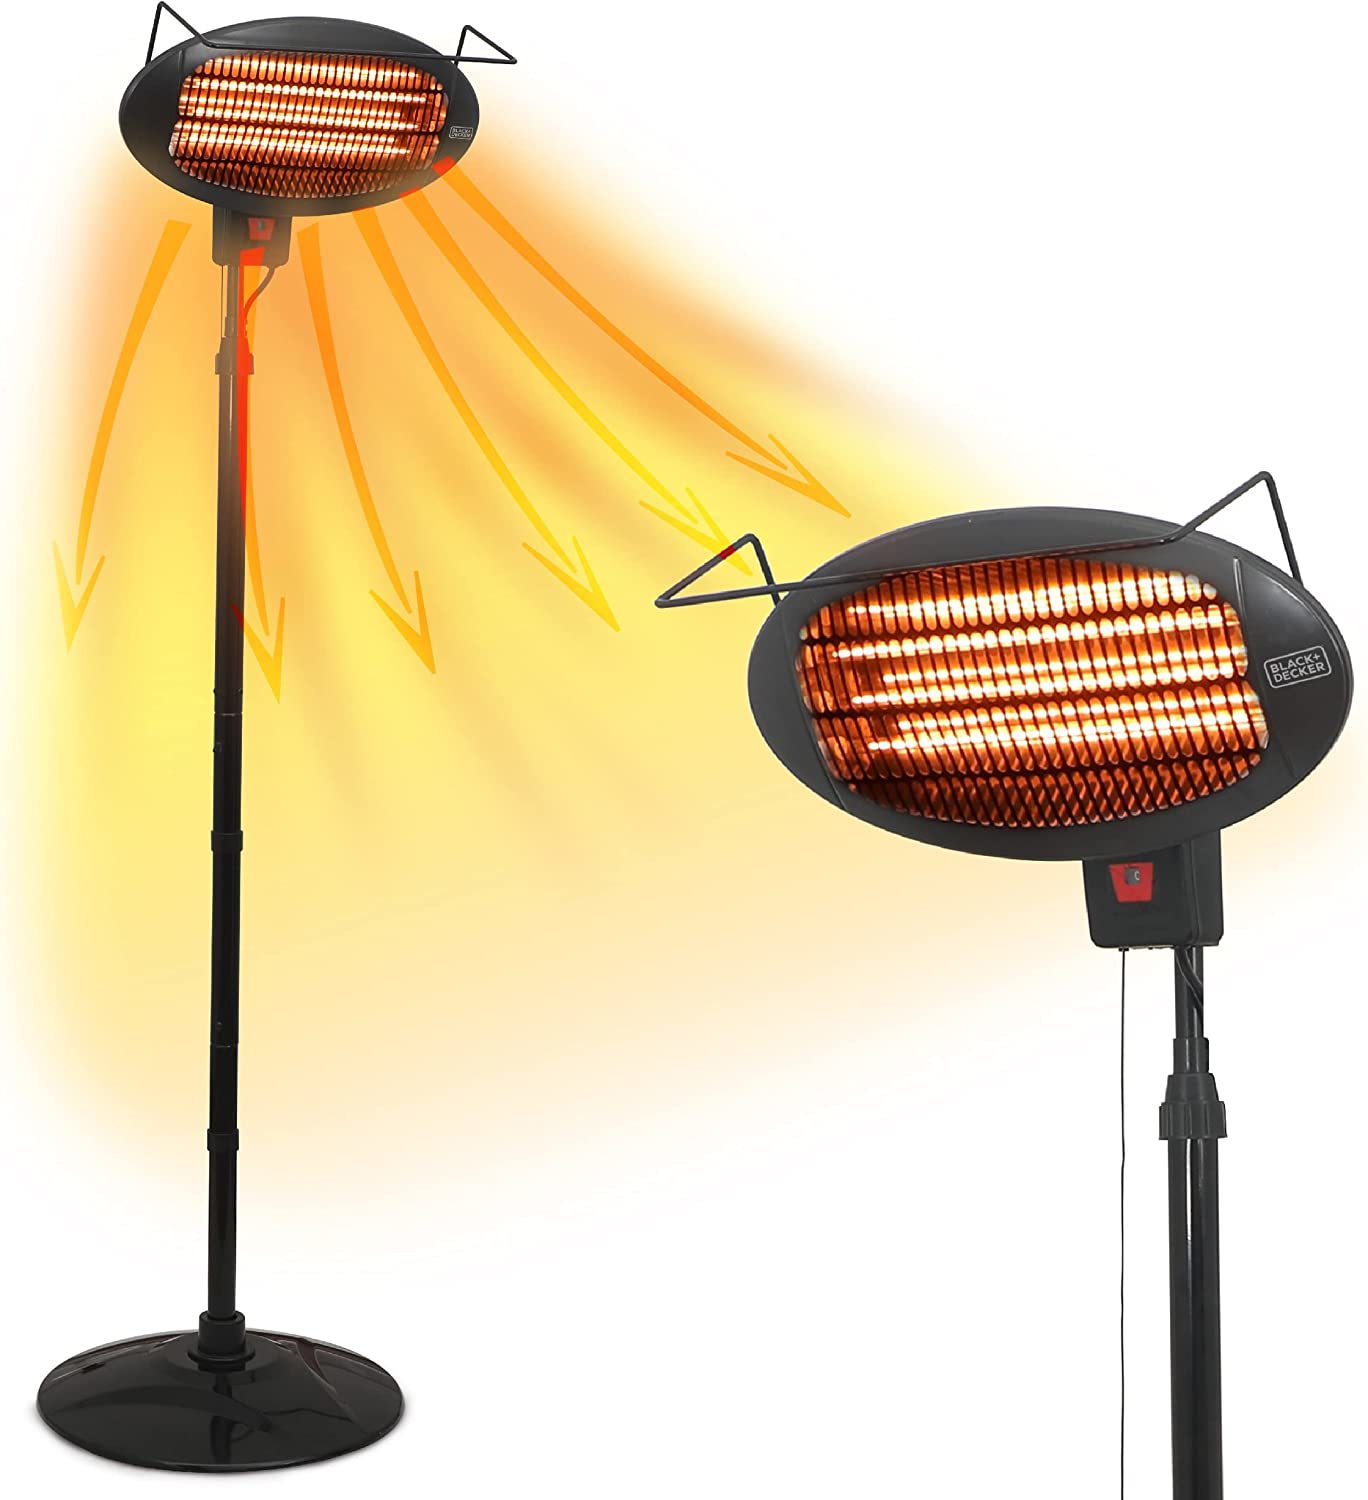 Black+Decker Patio Floor Electric Heater, Patio Heater Stand For Outdoors With 3 - $129.99